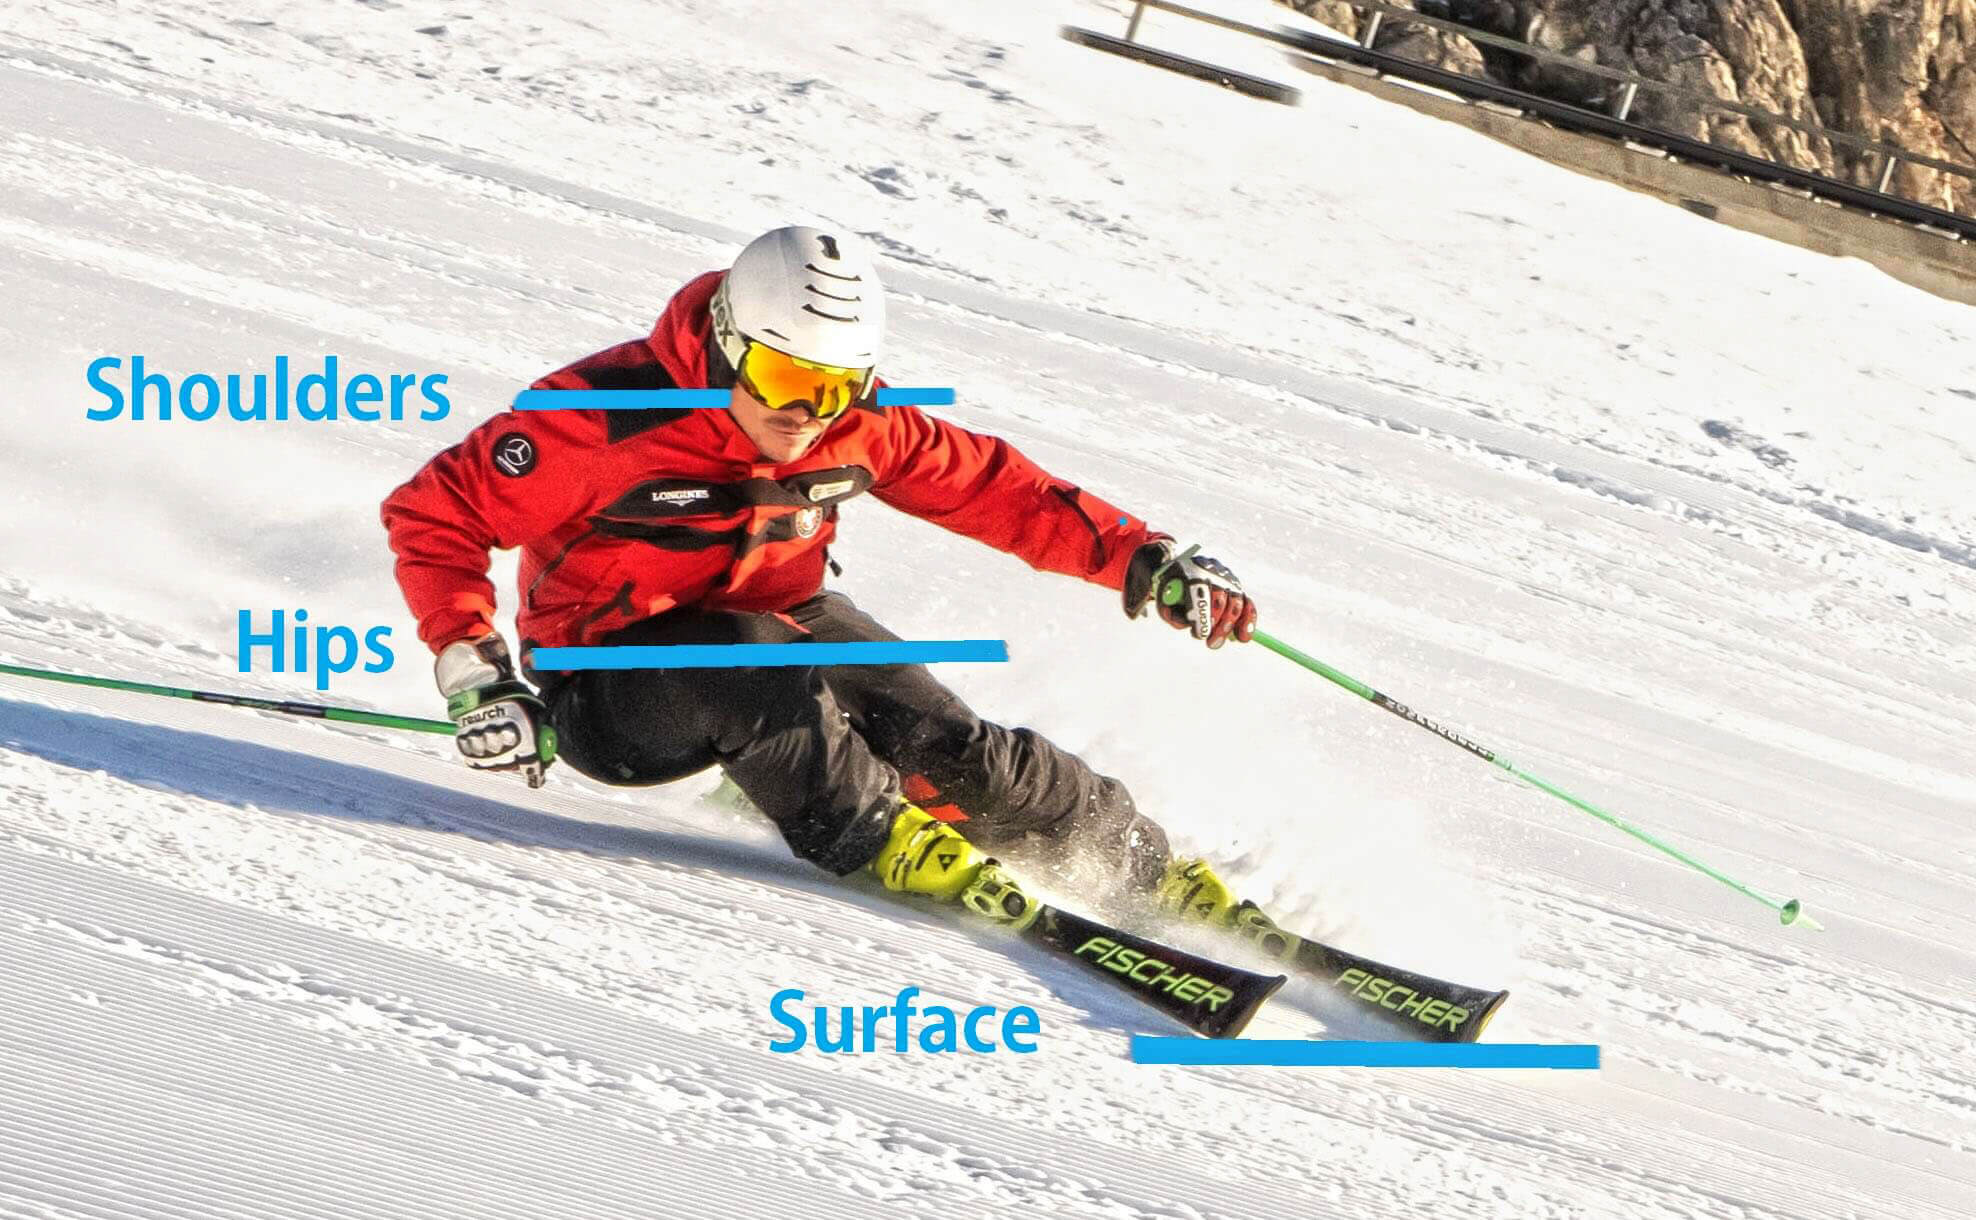 Ski instructor showing leveling at the hips and the shoulders with the snow surface